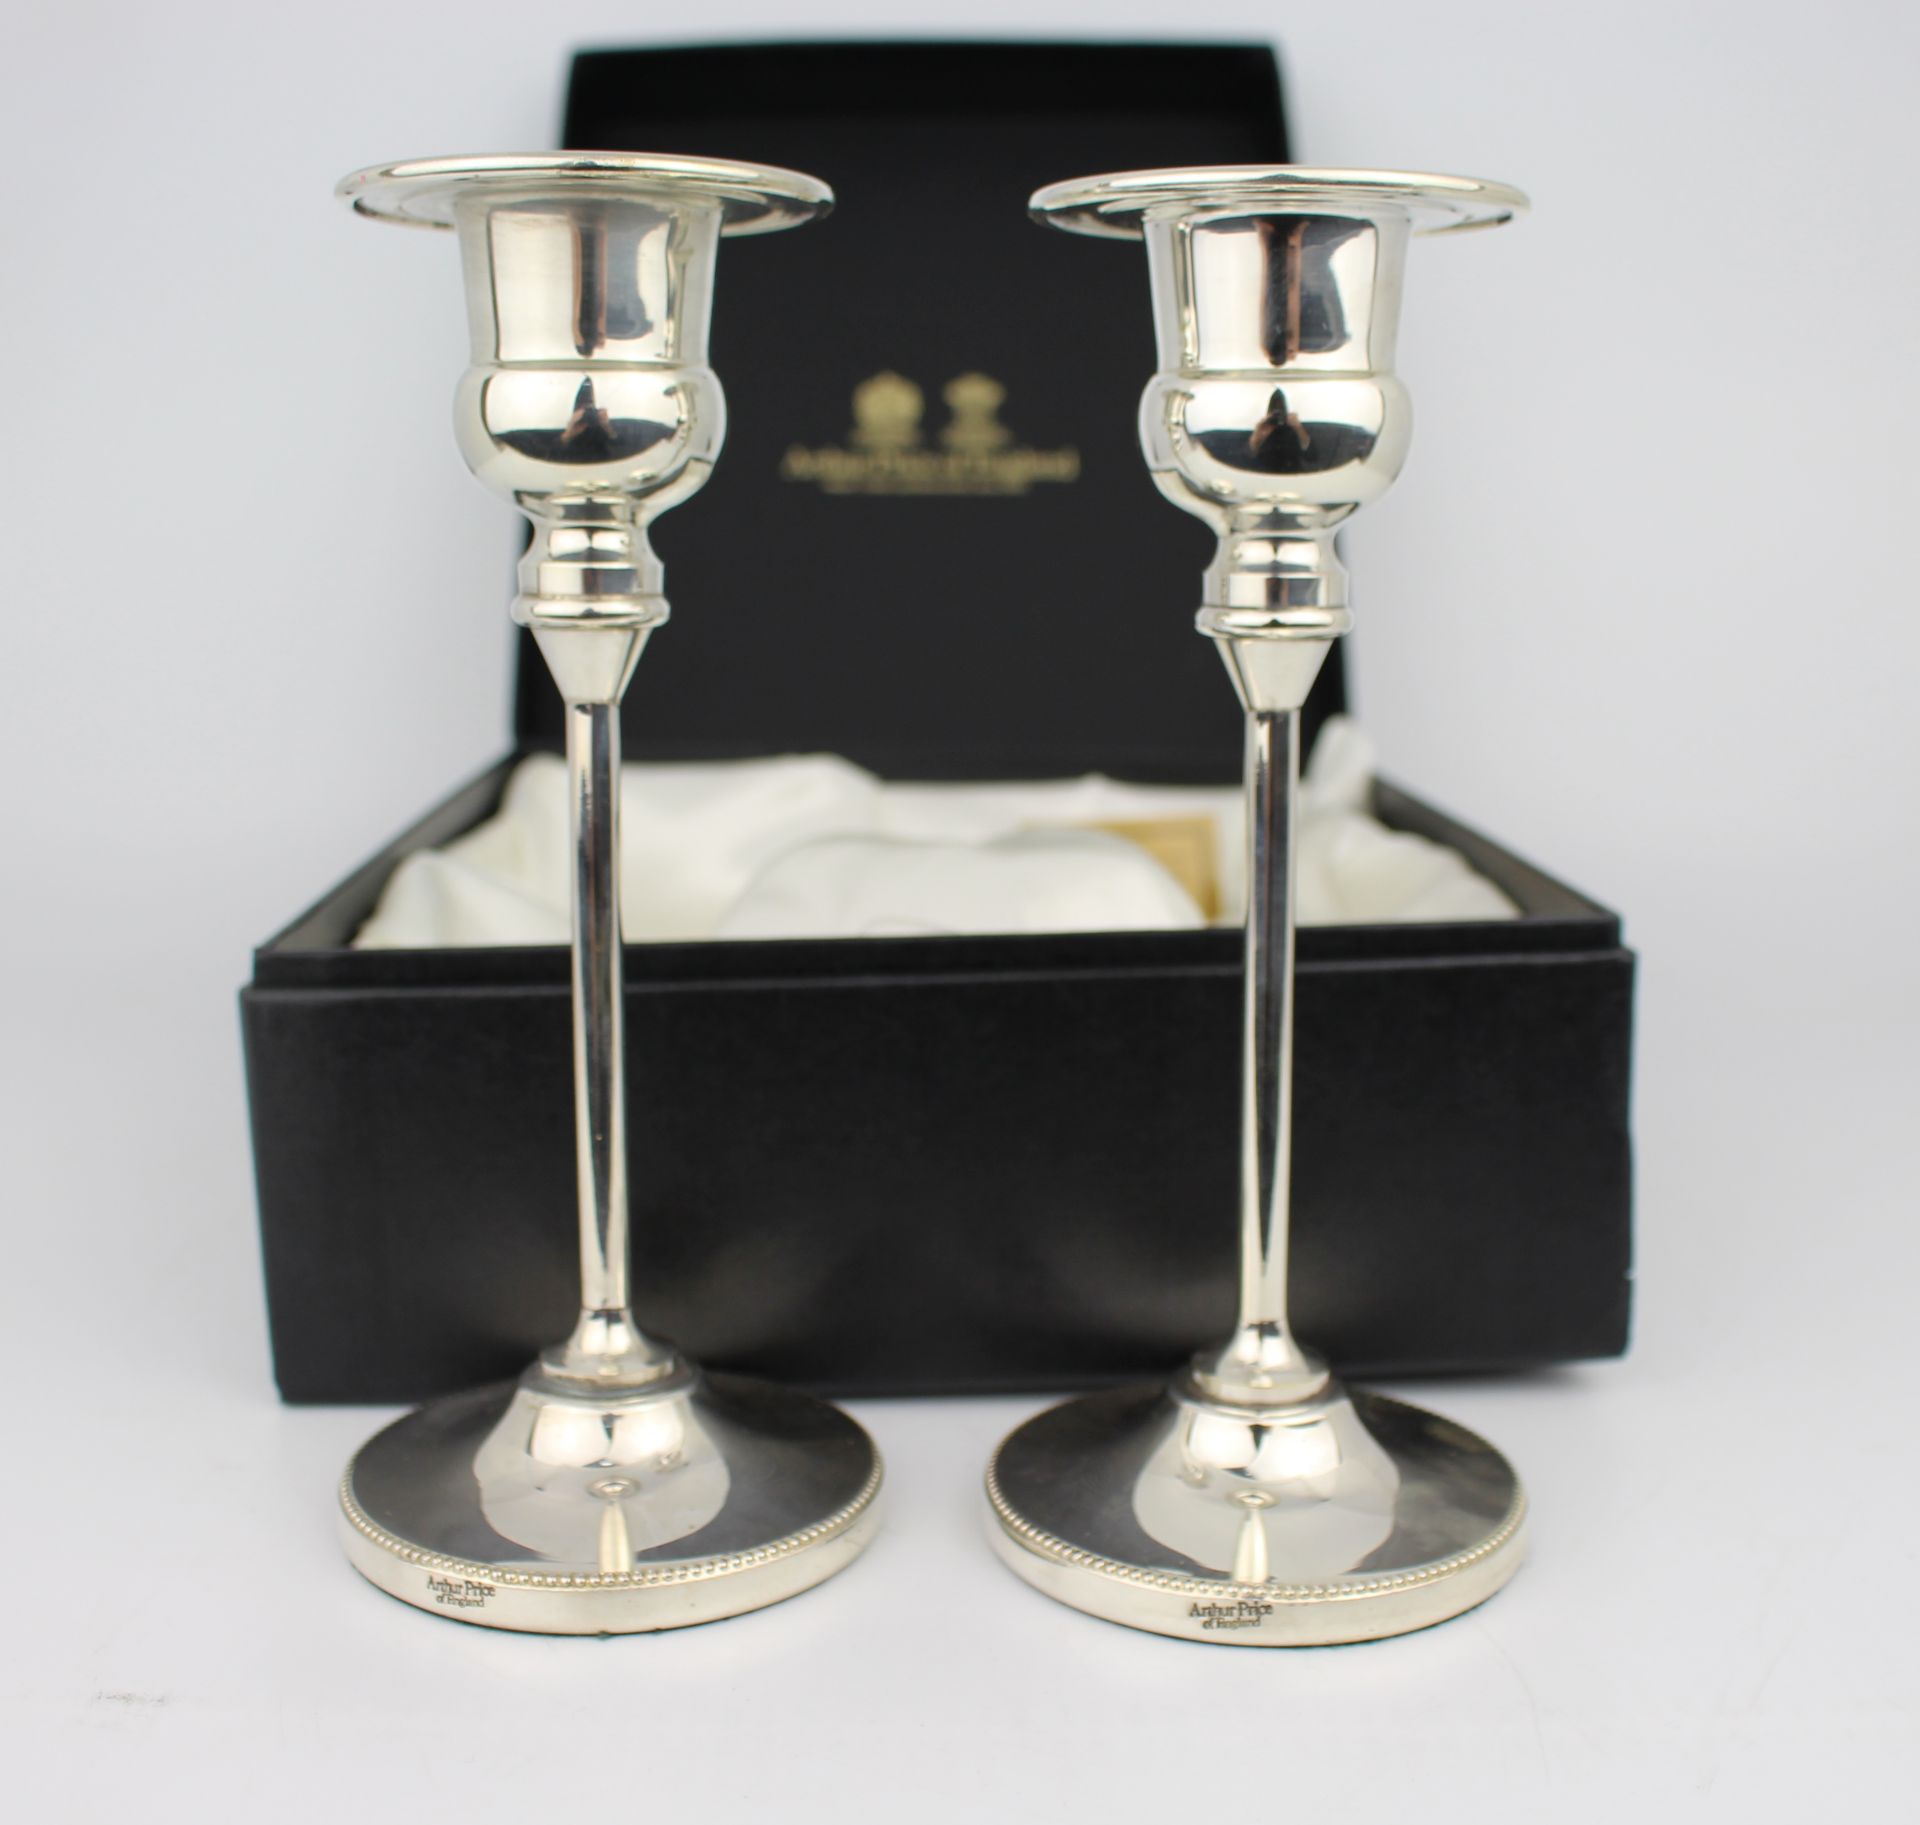 Cased Pair of Arthur Price Silver Plated Candlesticks - Image 3 of 5